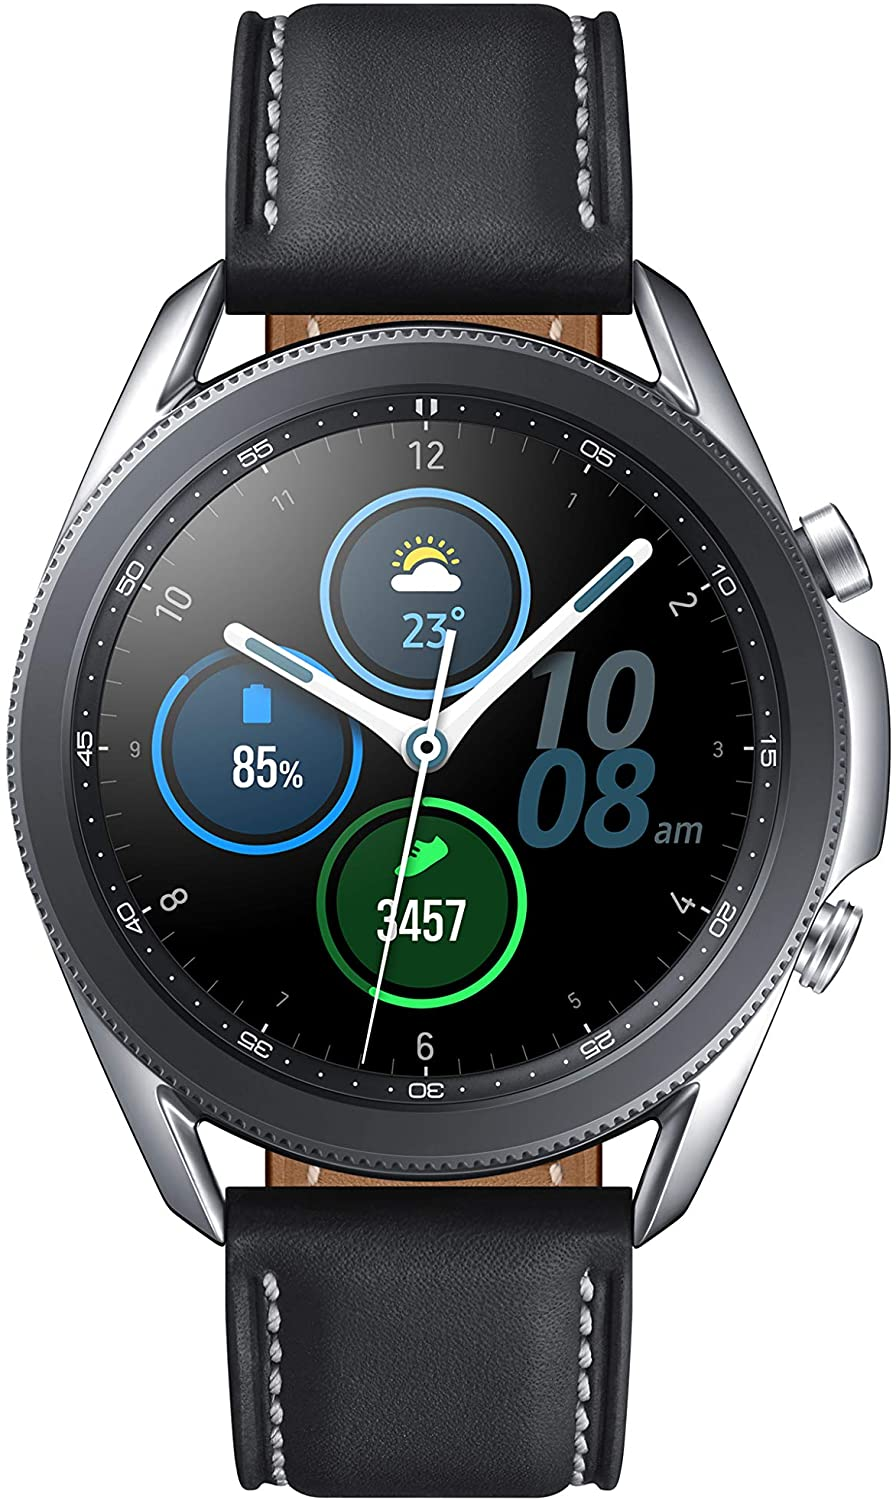 galaxy watch 3 front